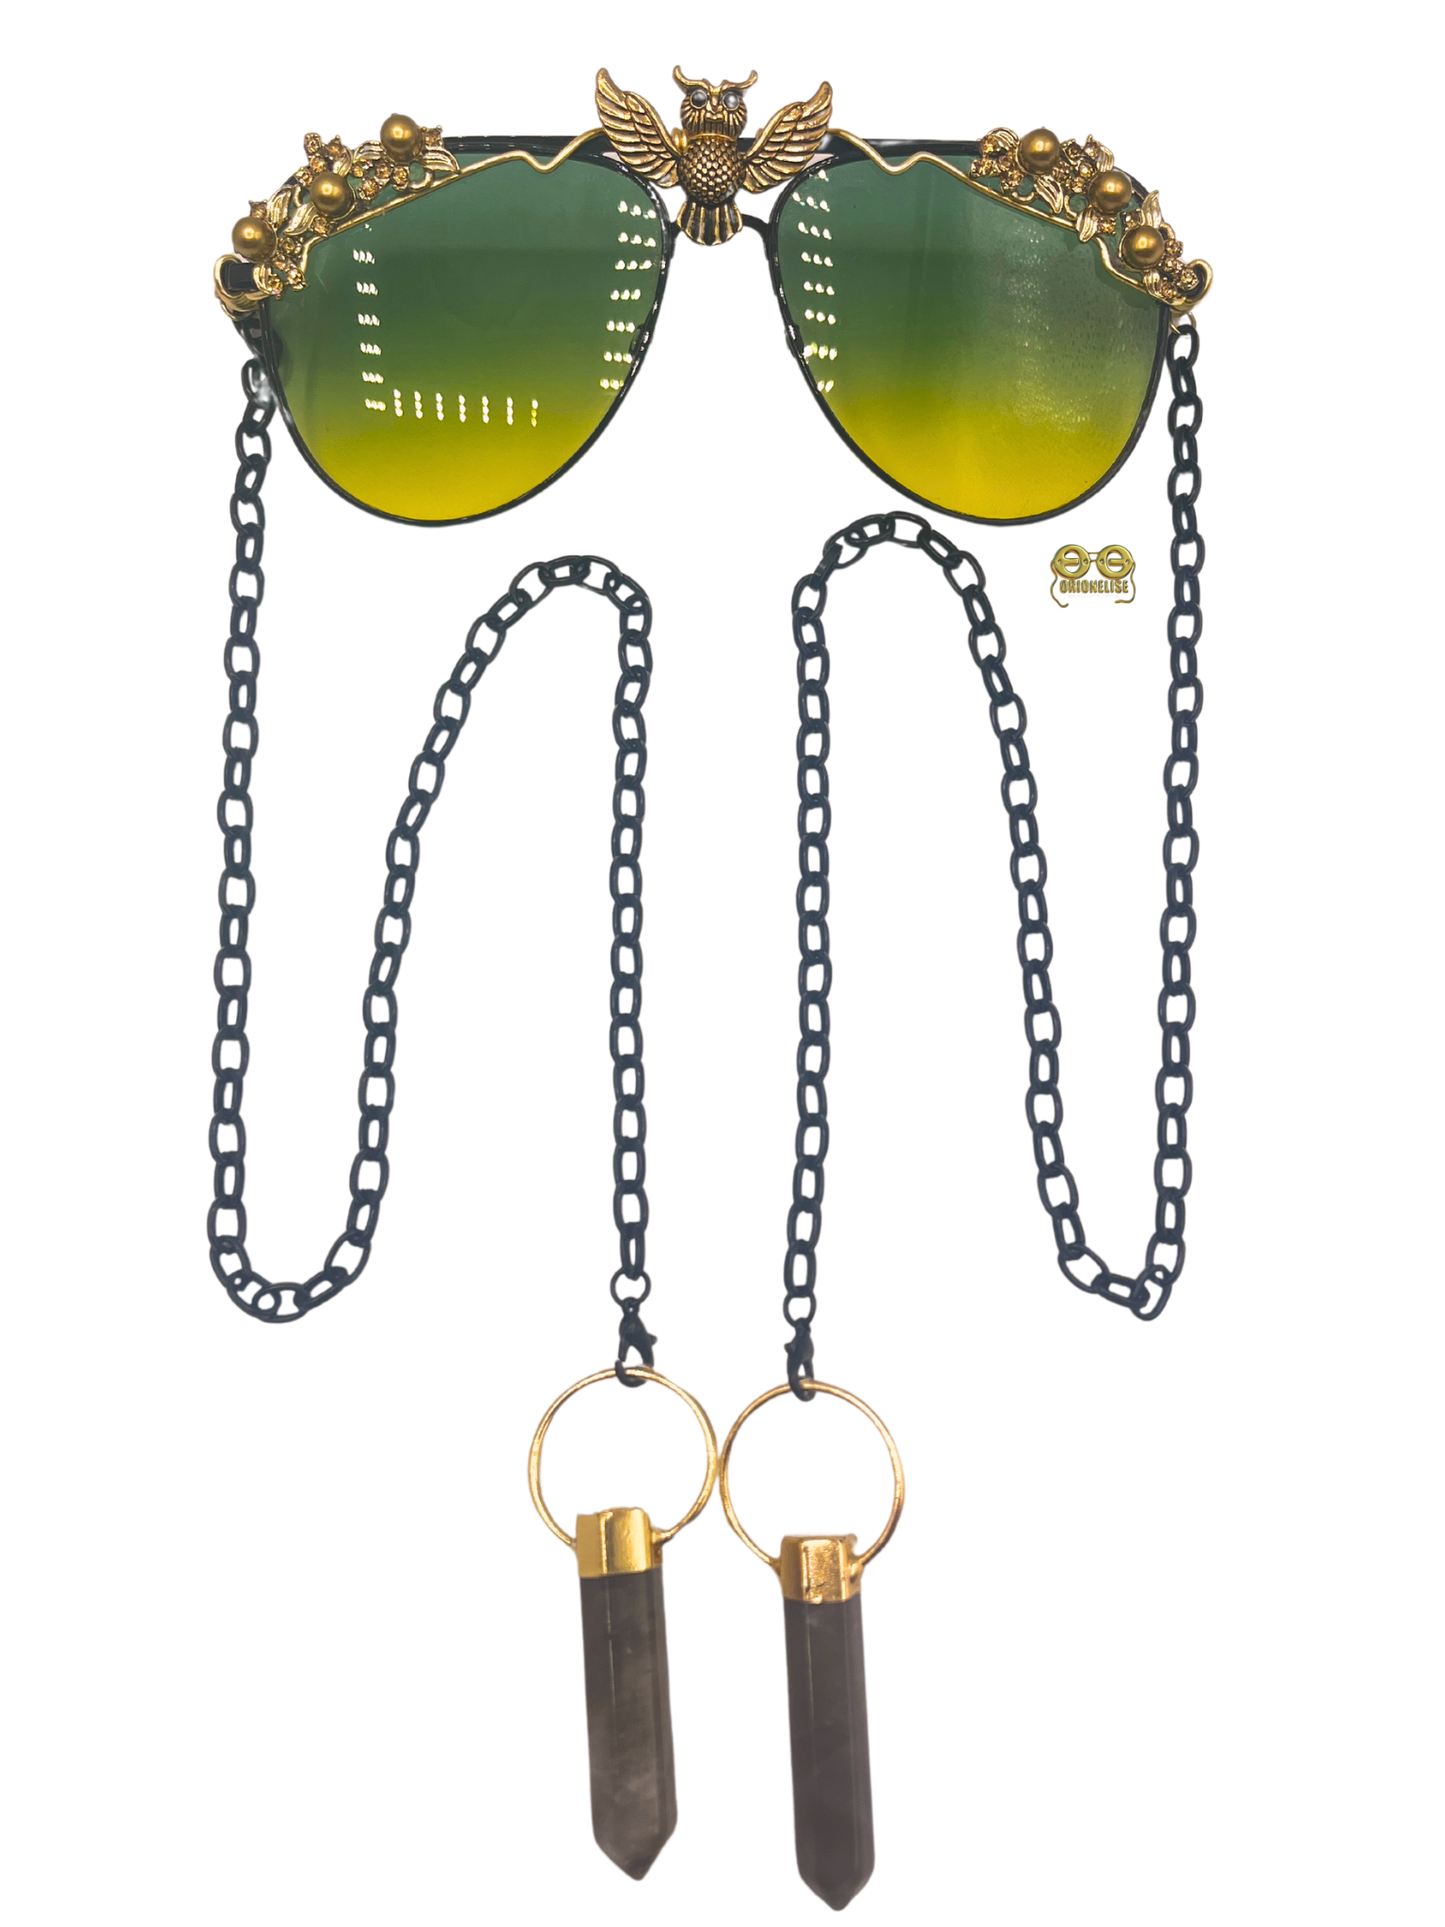 "All The Wiser" fashion eyewear by Orion Elise. Handcrafted black wire frame with captivating ombré lens transitioning from emerald green to golden yellow. Delicate gold wire accents and black chain with mesmerizing tourmaline stone.